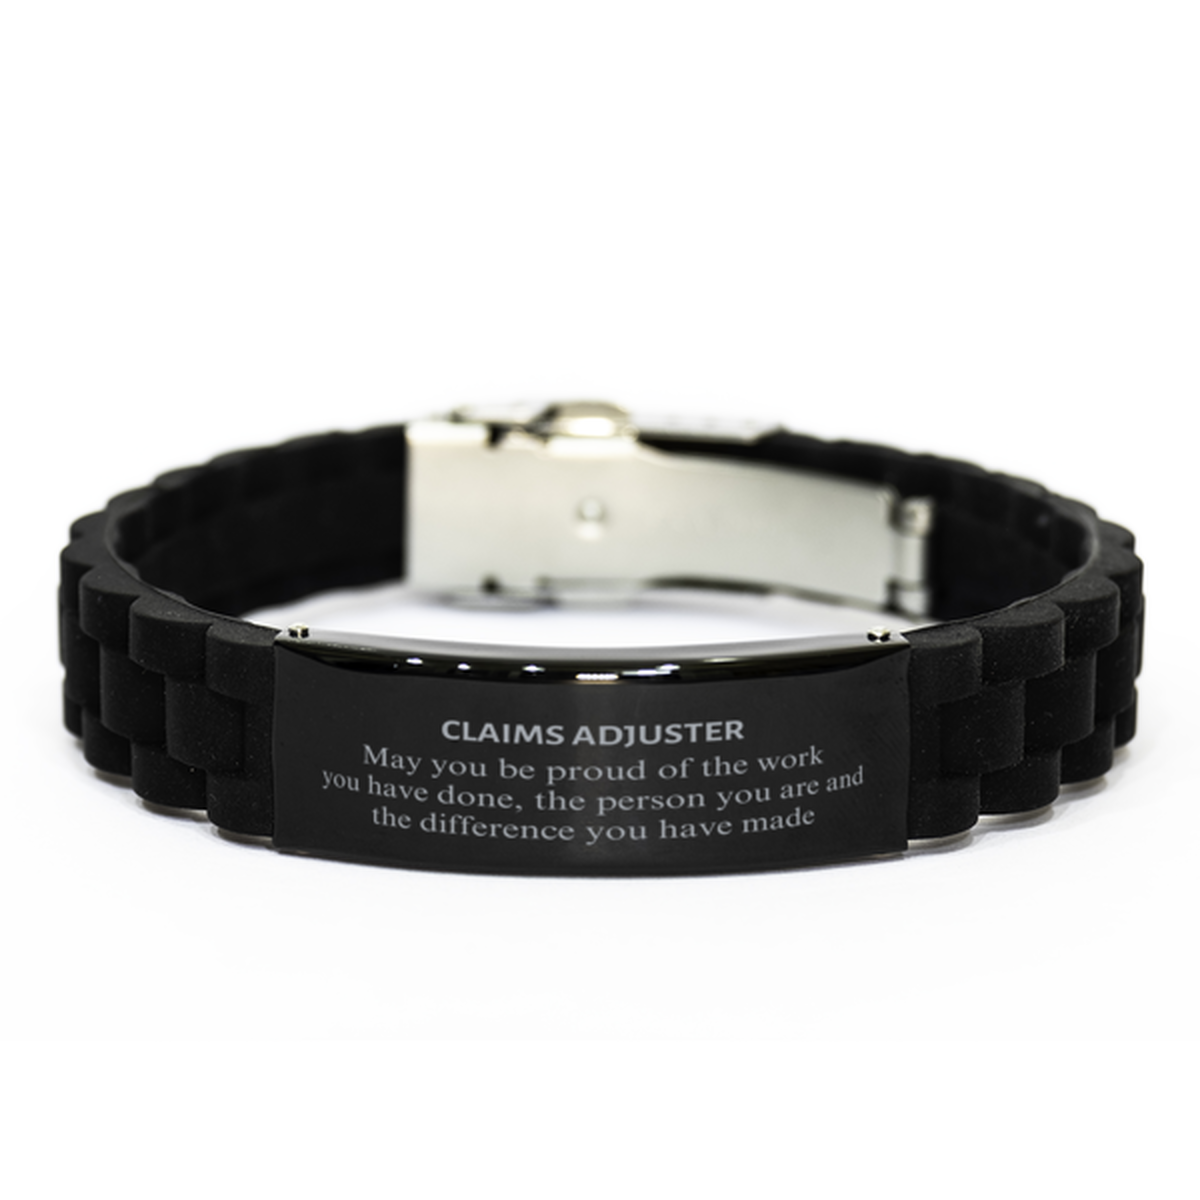 Claims Adjuster May you be proud of the work you have done, Retirement Claims Adjuster Black Glidelock Clasp Bracelet for Colleague Appreciation Gifts Amazing for Claims Adjuster